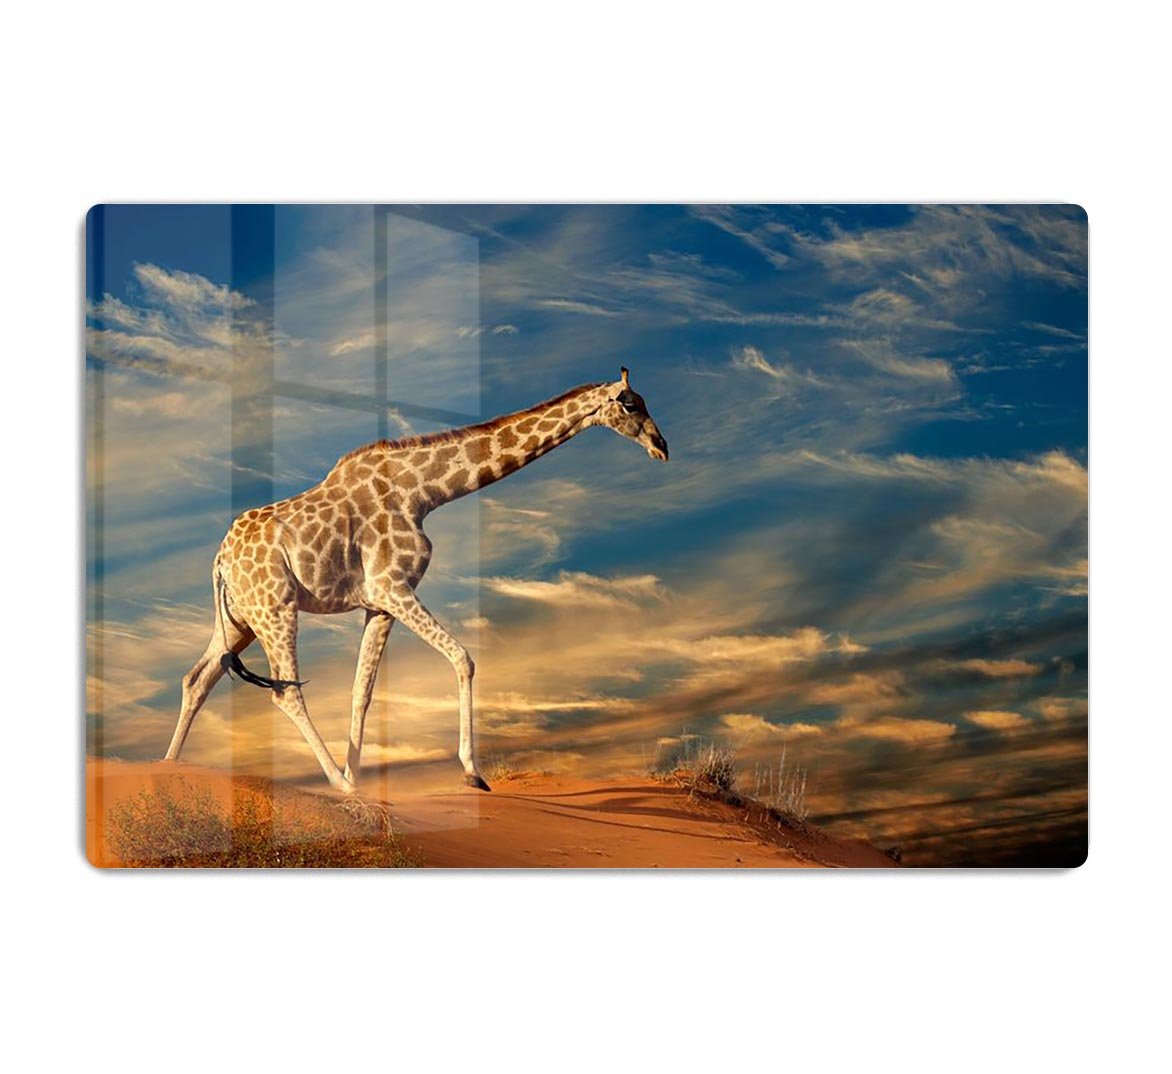 Giraffe walking on a sand dune with clouds South Africa HD Metal Print - Canvas Art Rocks - 1